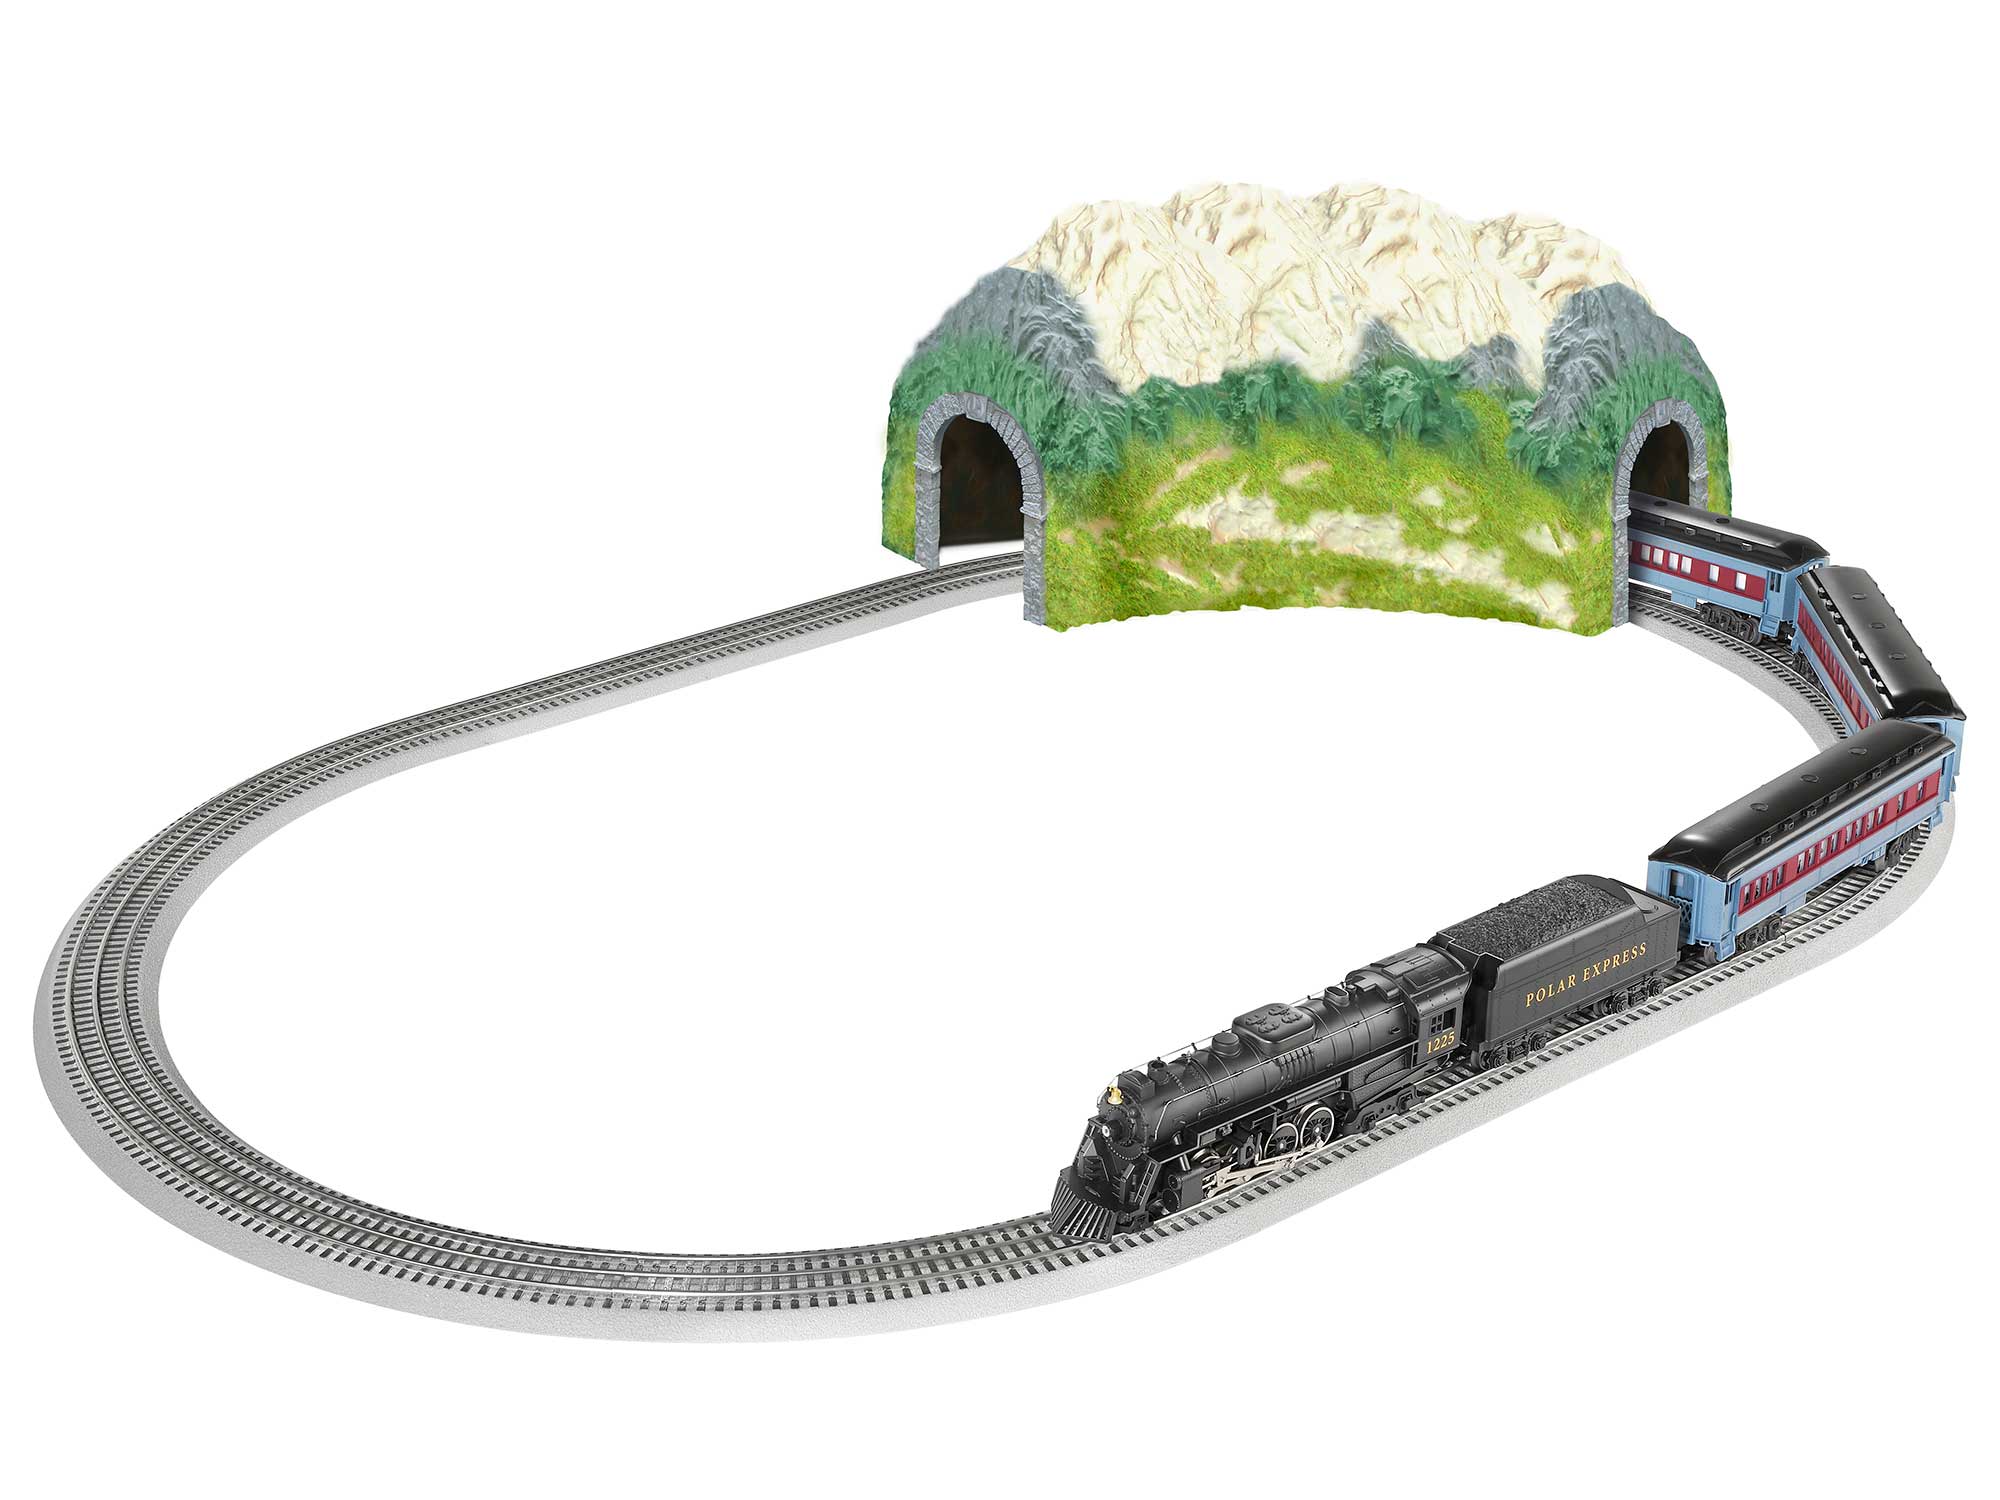 'PENNSY' 6161 Stone Wall O-Scale Single Track Tunnel Portal for LIONEL MTH 